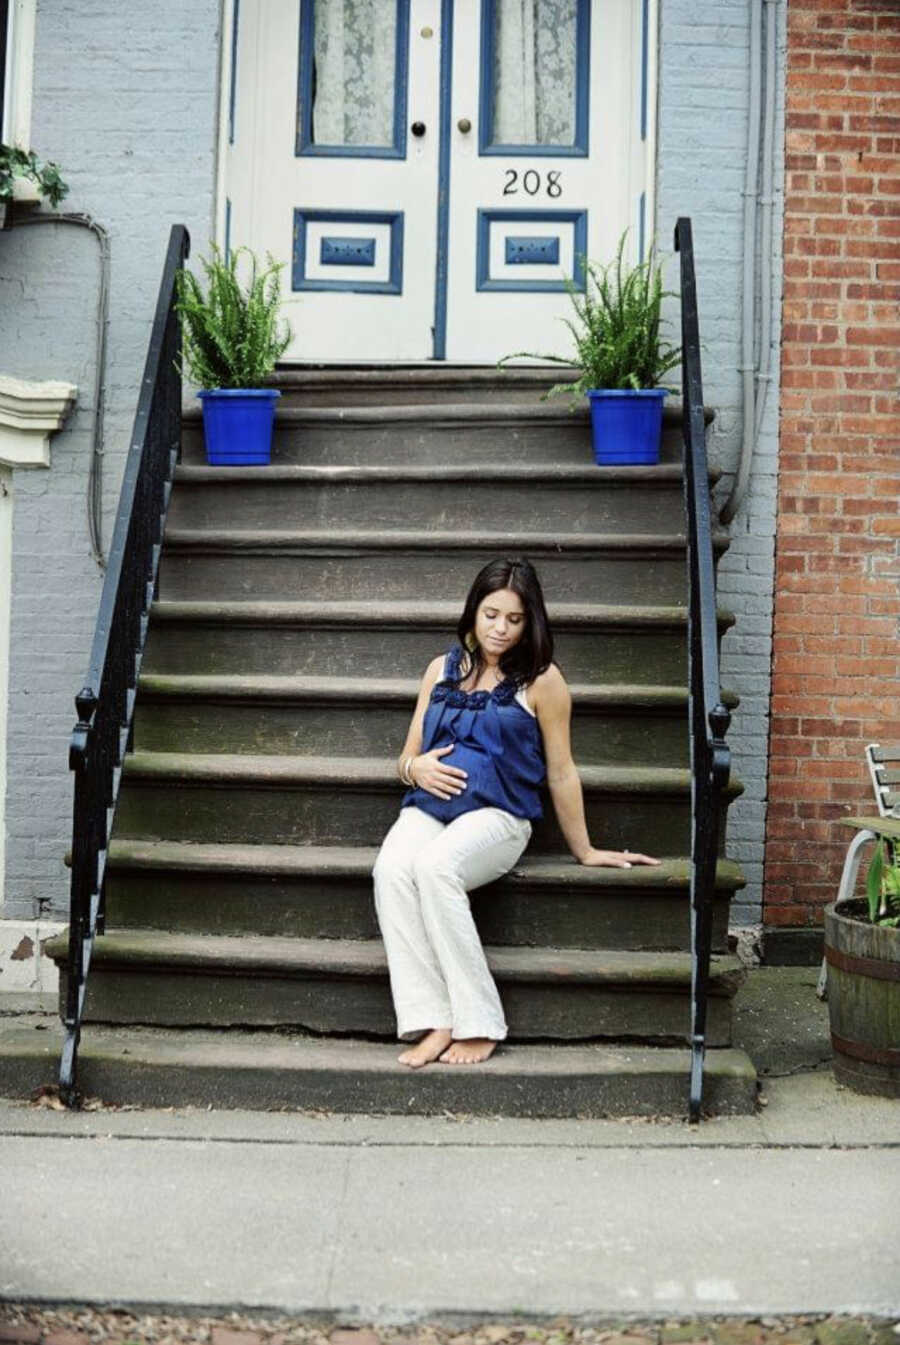 pregnant woman sits on stairs outside of an apartment while holding pregnant belly wearing blue shirt with blue plant pots in the background next to brick wall